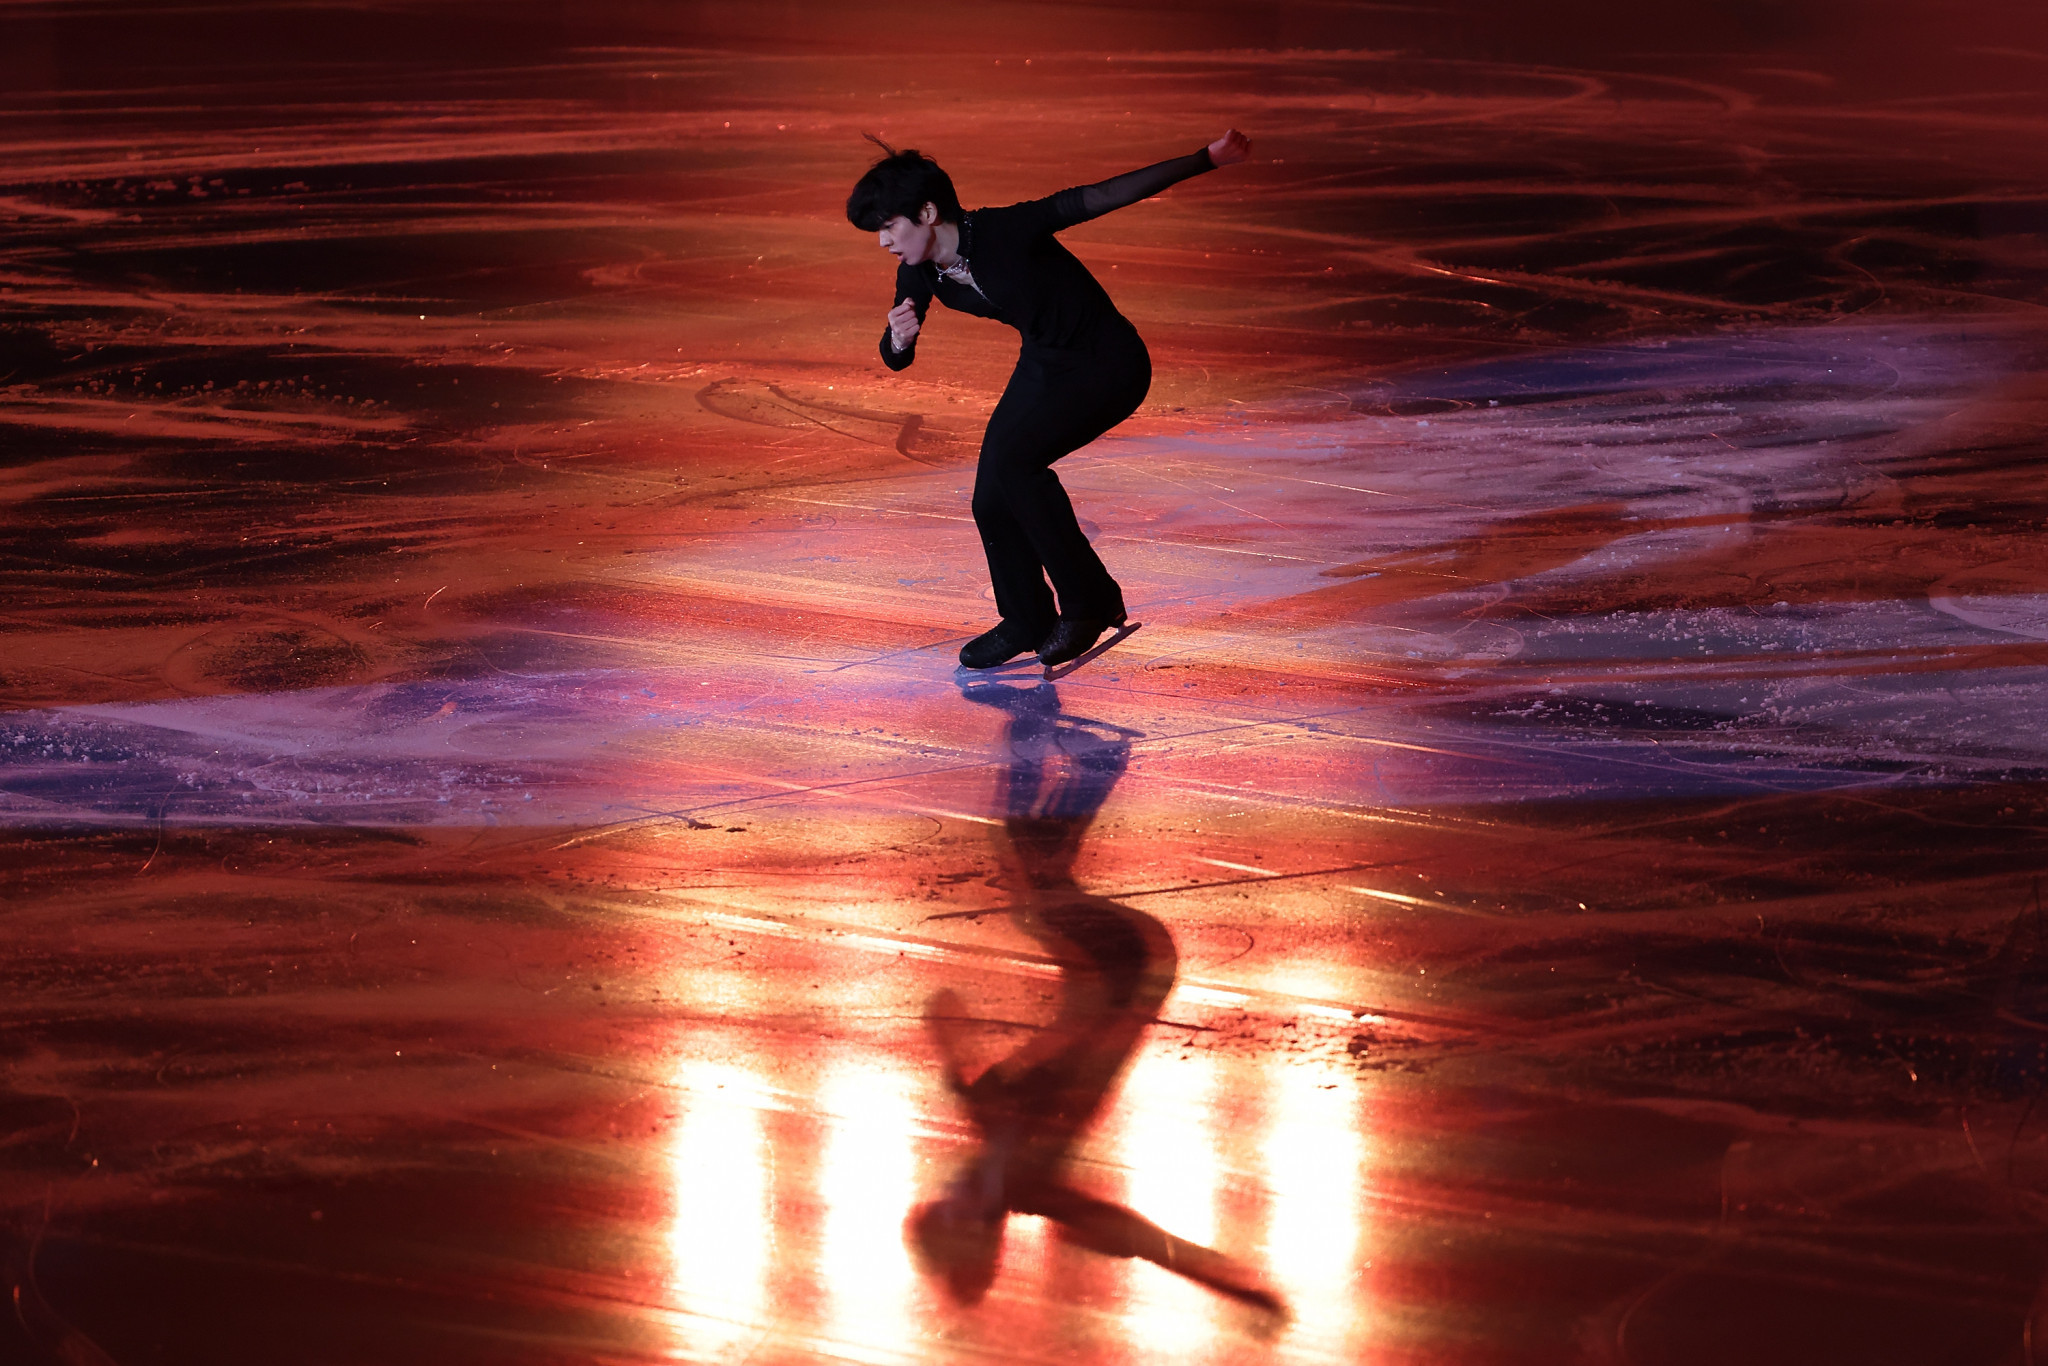 Junhwan Cha of South Korea leads the men's individual competition at the ISU Four Continents Figure Skating Championships in Tallinn, following the short programme ©Getty Images